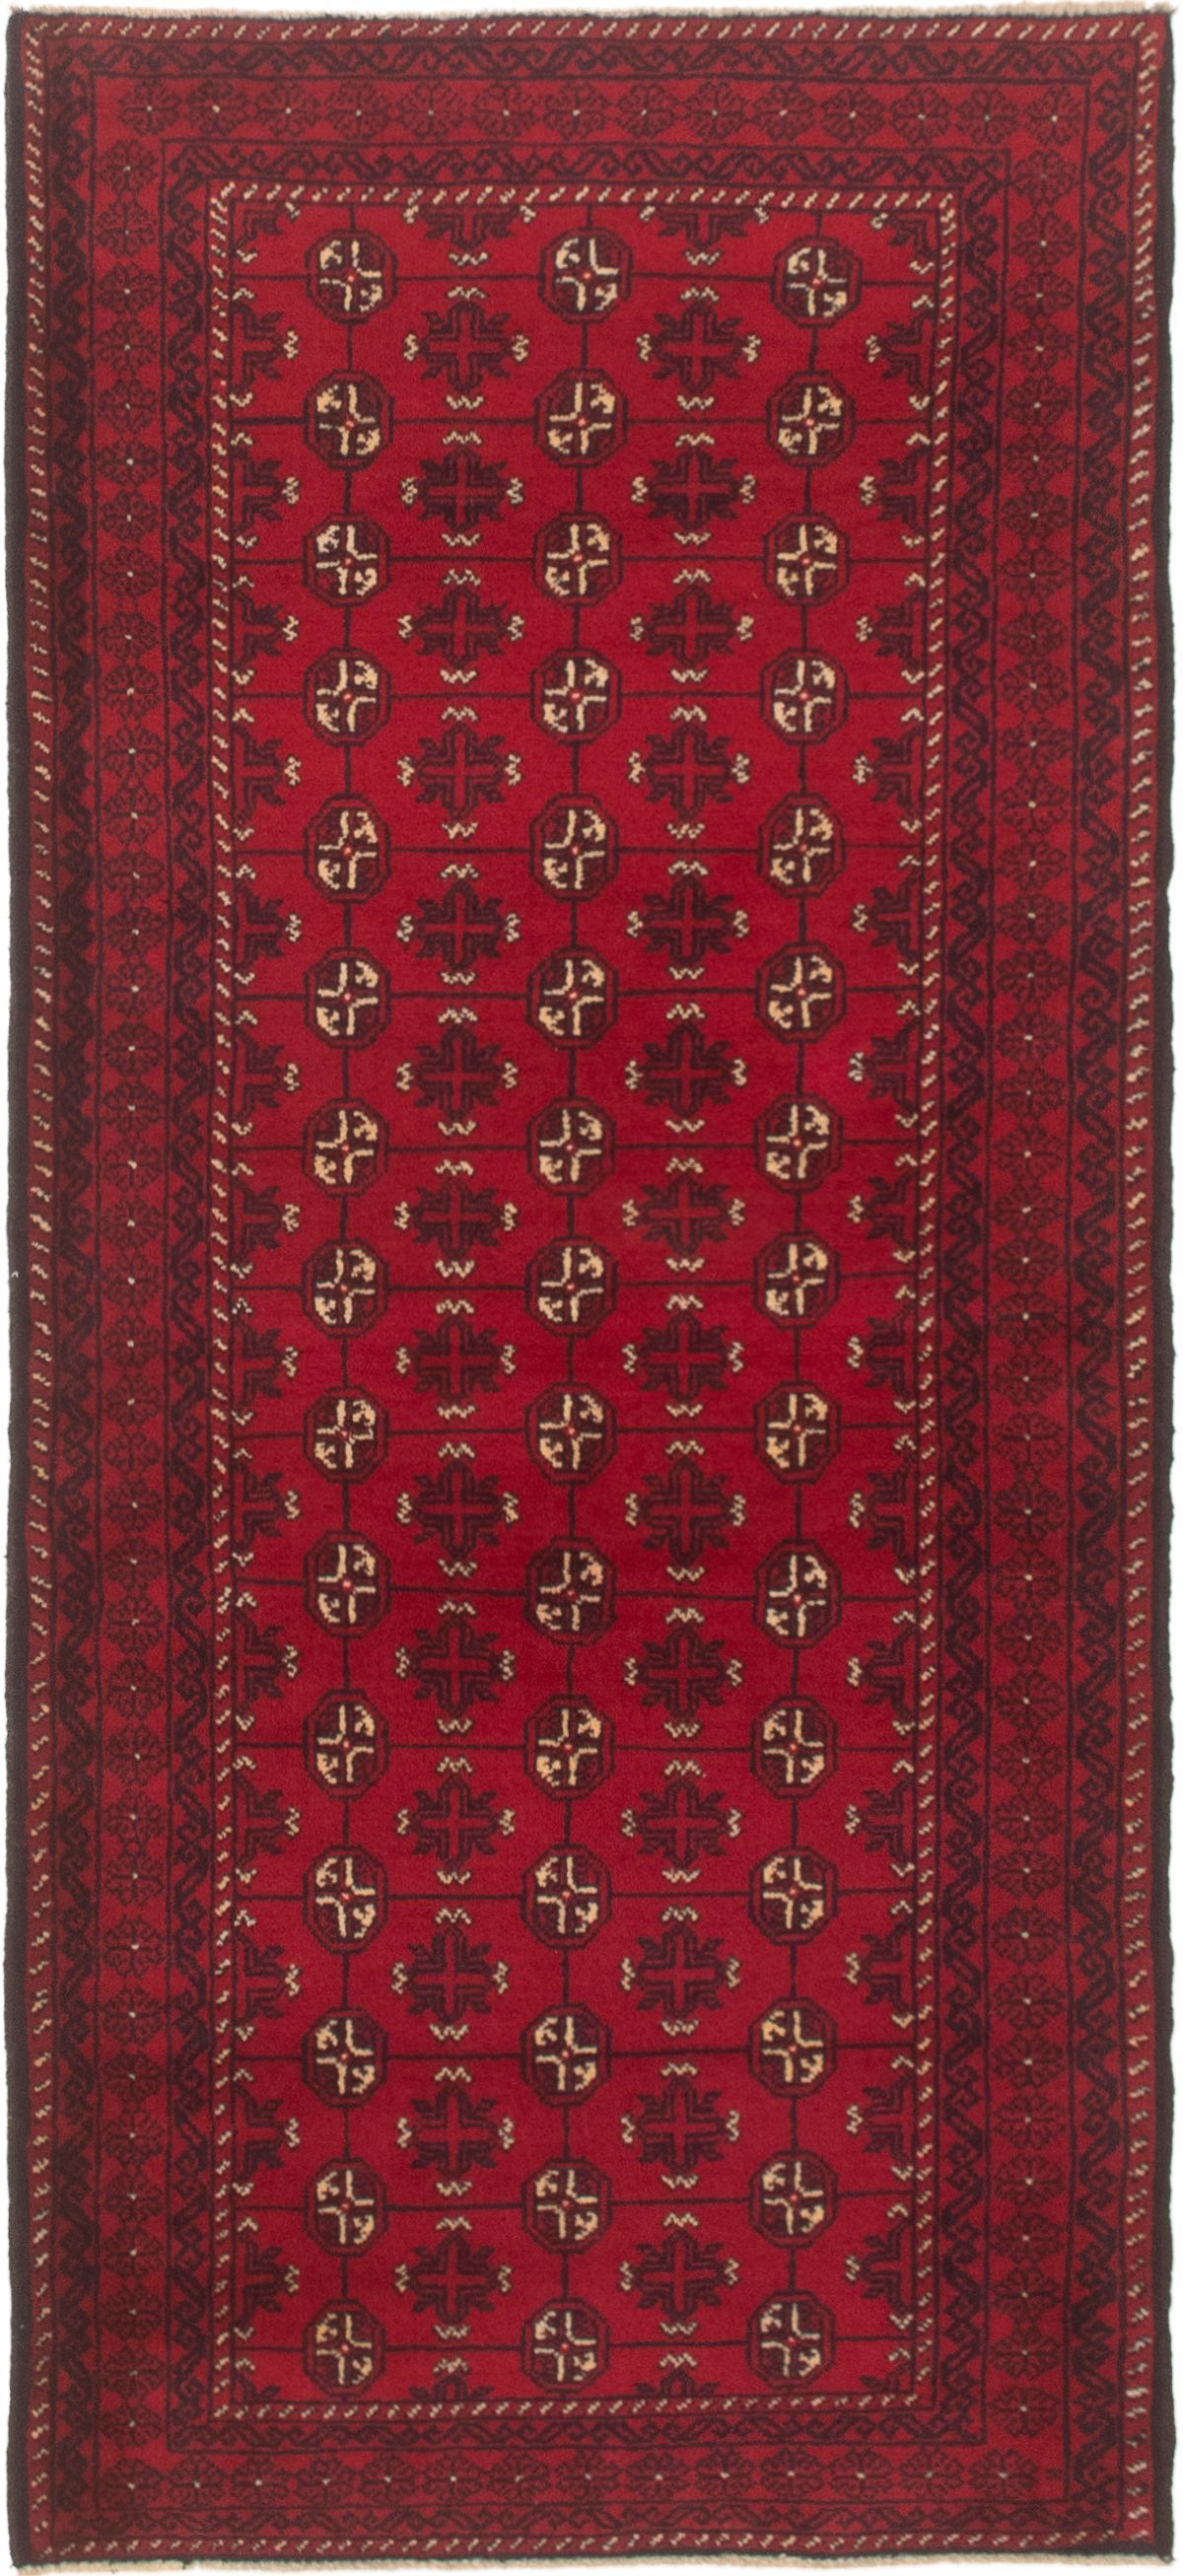 Hand-knotted Rizbaft Red Wool Rug 2'11" x 6'5"  Size: 2'11" x 6'5"  